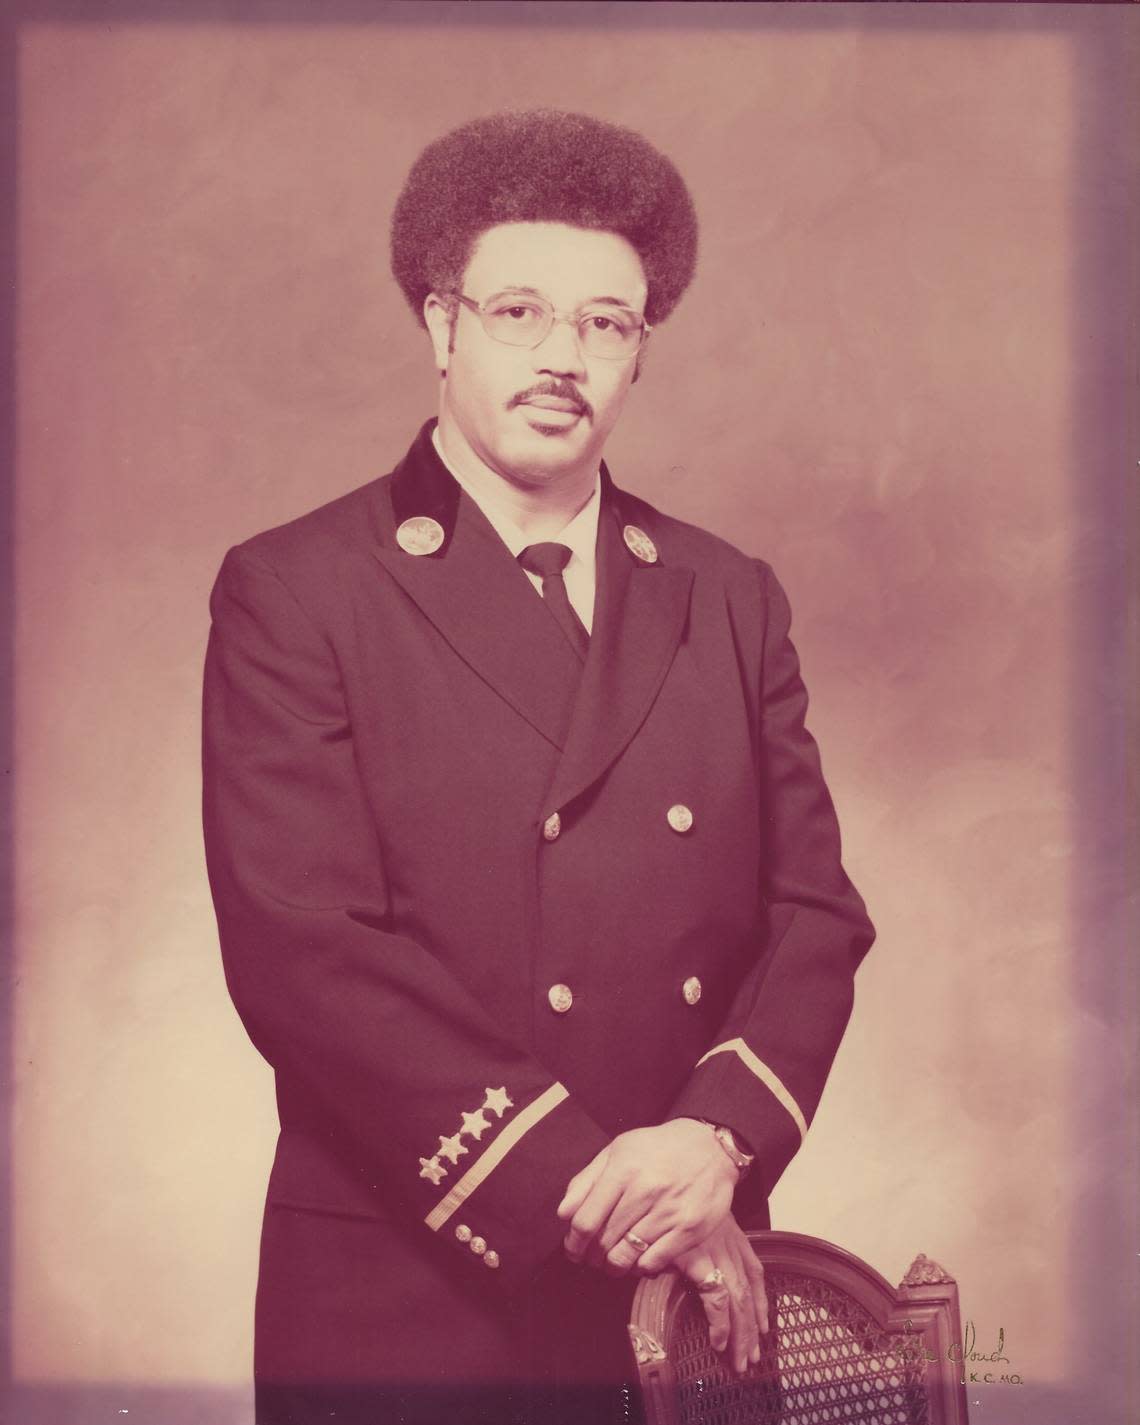 In his 36-year career, Poole became Kansas’ first Black deputy chief and the first Black acting chief.